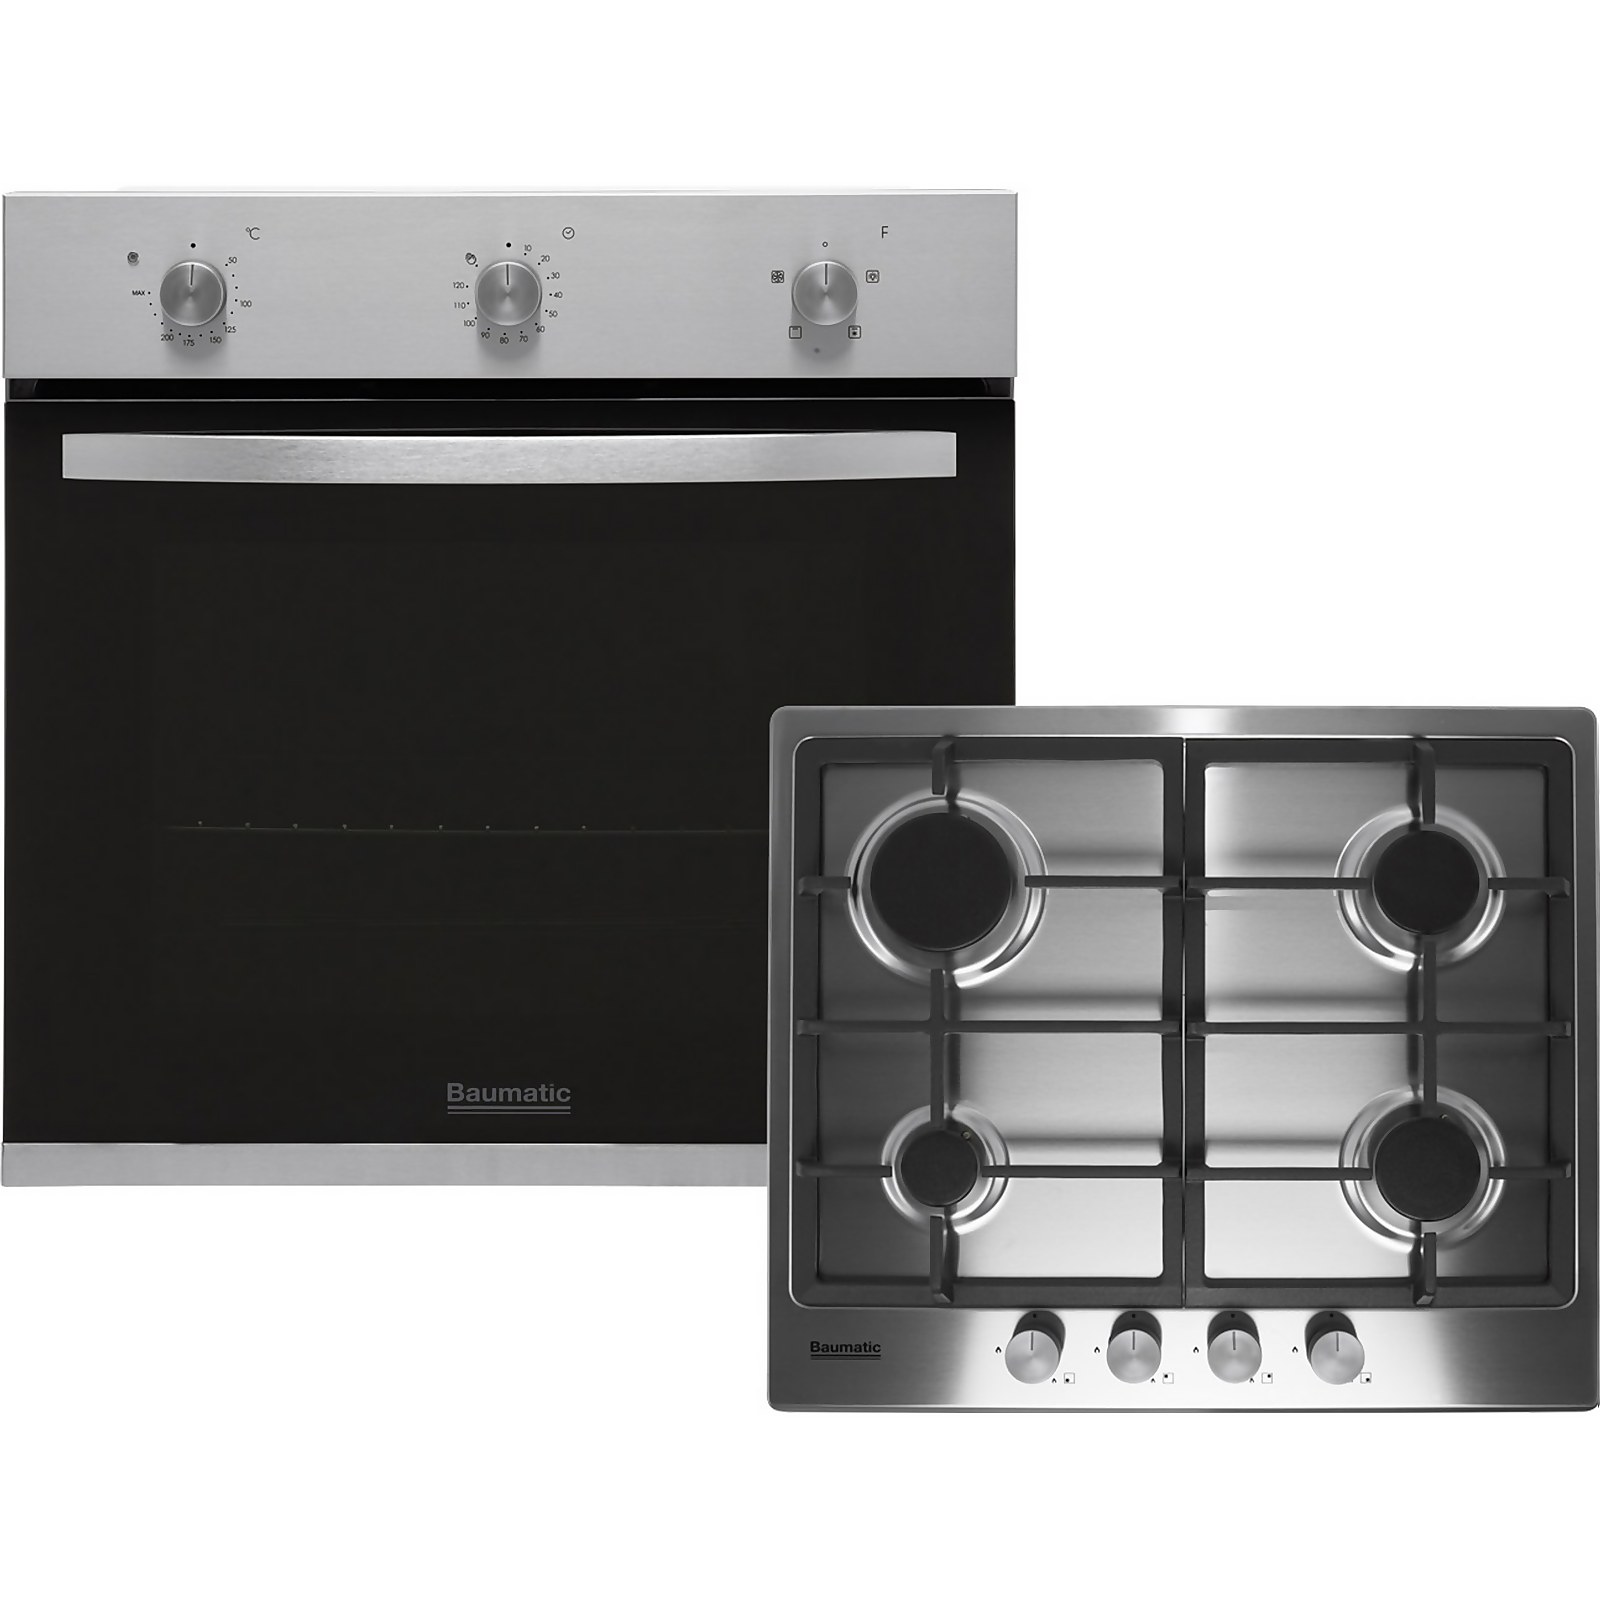 Photo of Baumatic Bgpk600x Built In Electric Single Oven And Gas Hob Pack - Stainless Steel 